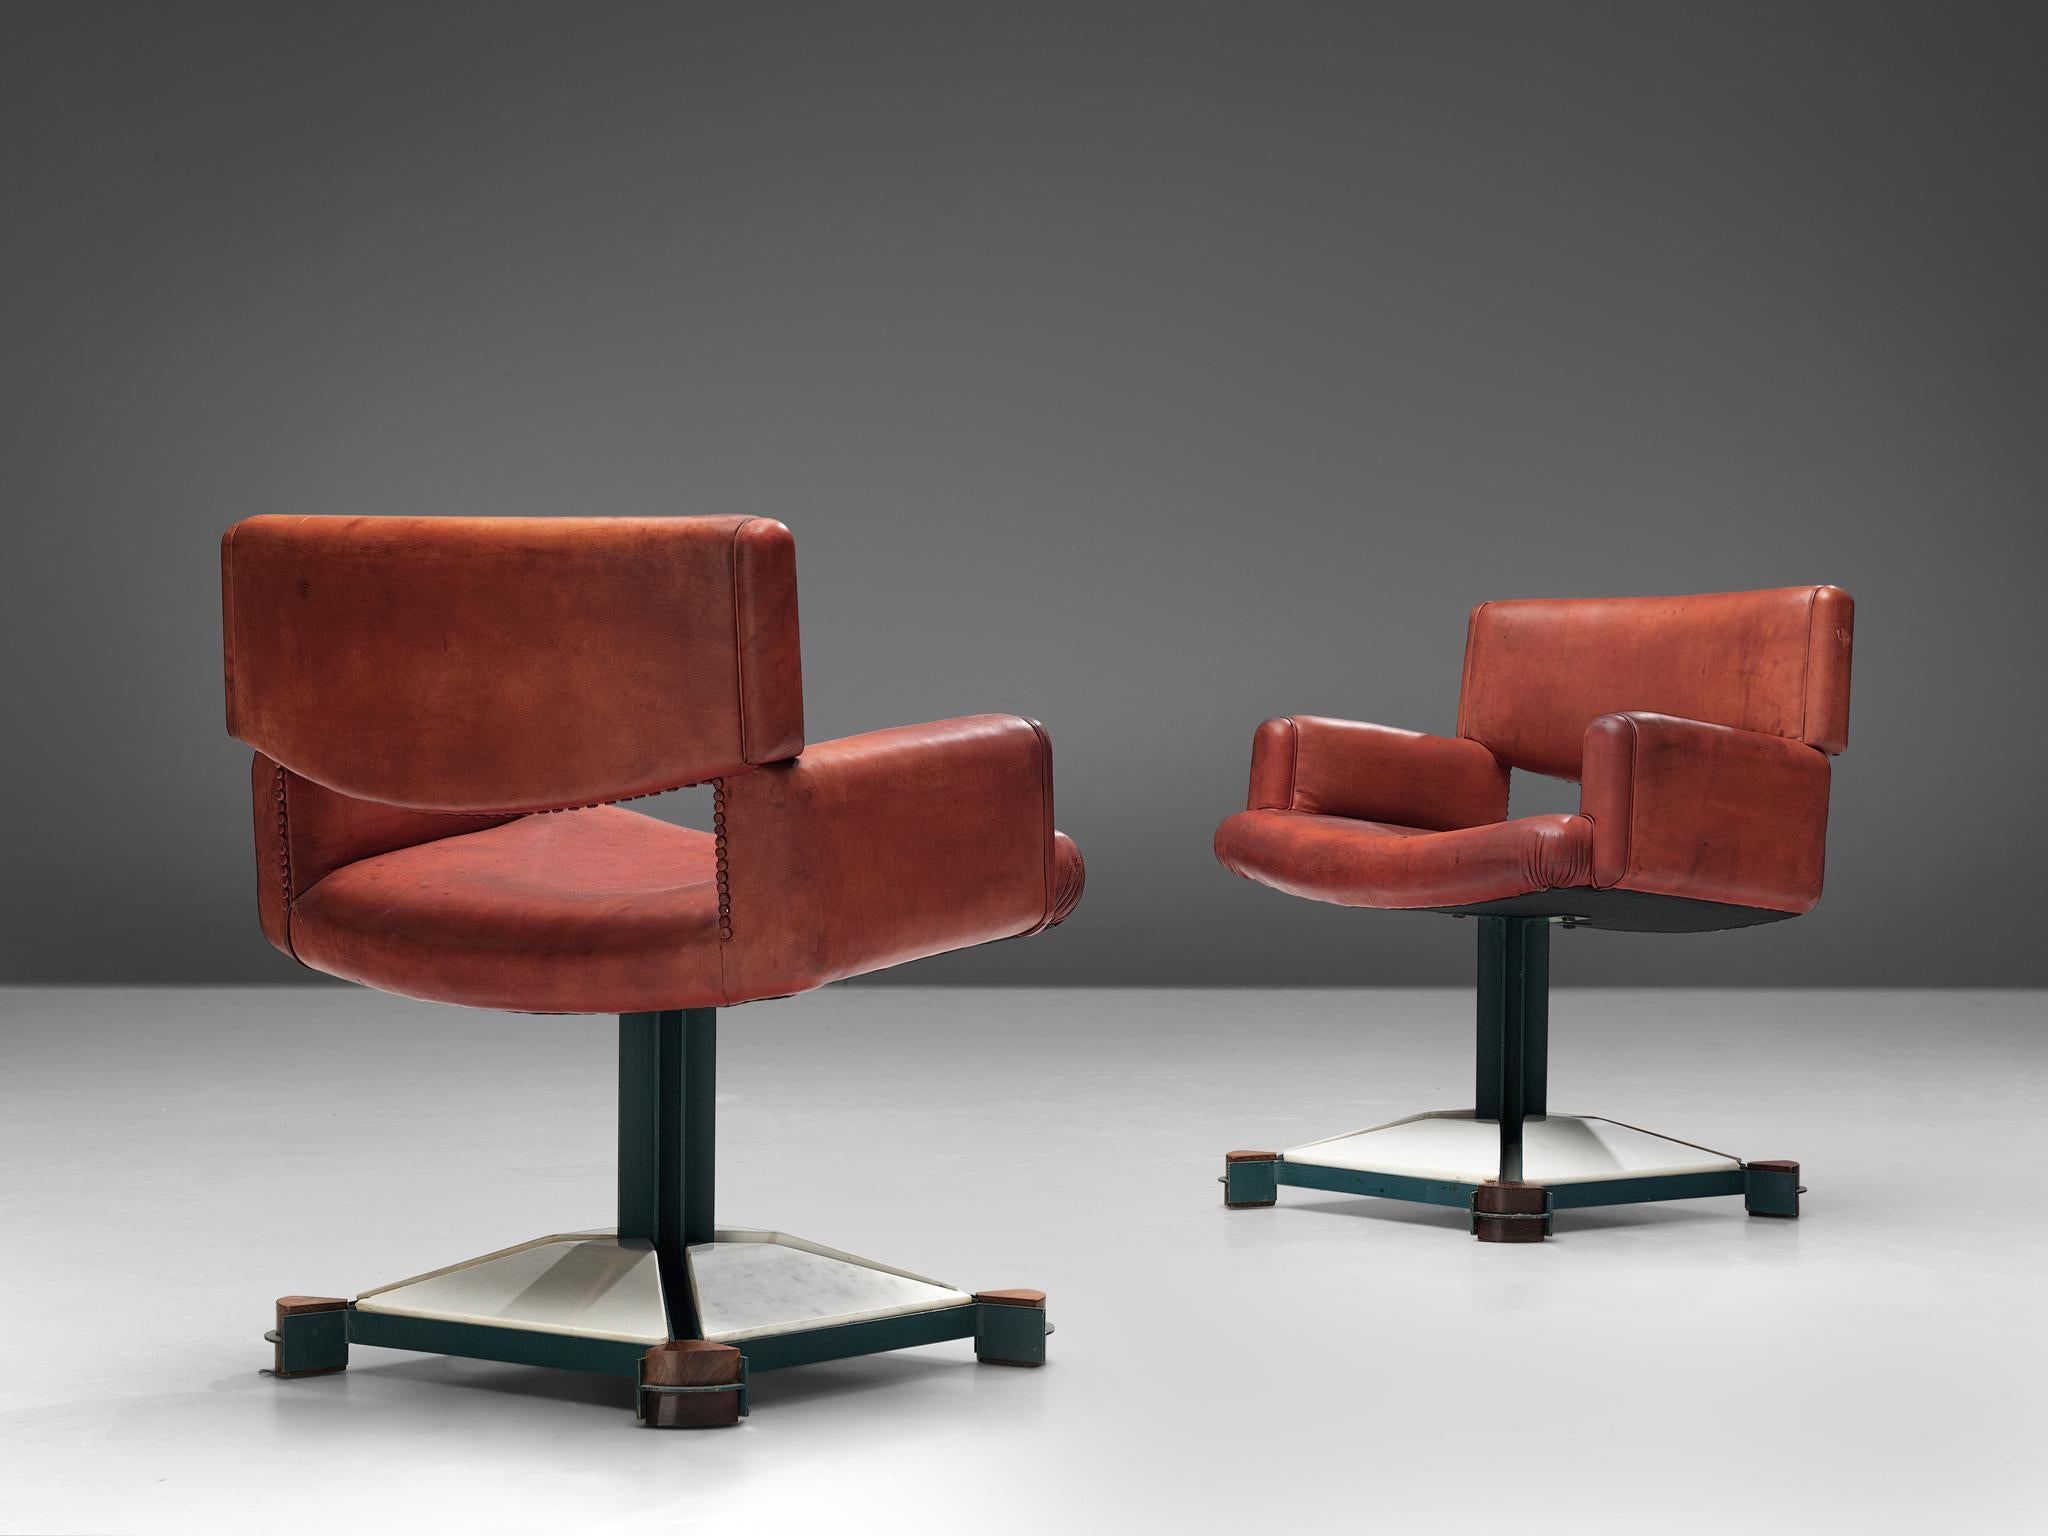 Italian pair of armchairs, marble, metal, leather, wood, Italy, 1970s

Striking armchairs with great material combination and wonderful shapes. The designer of these wonderful chairs was able to combine four materials to form an exciting, unified